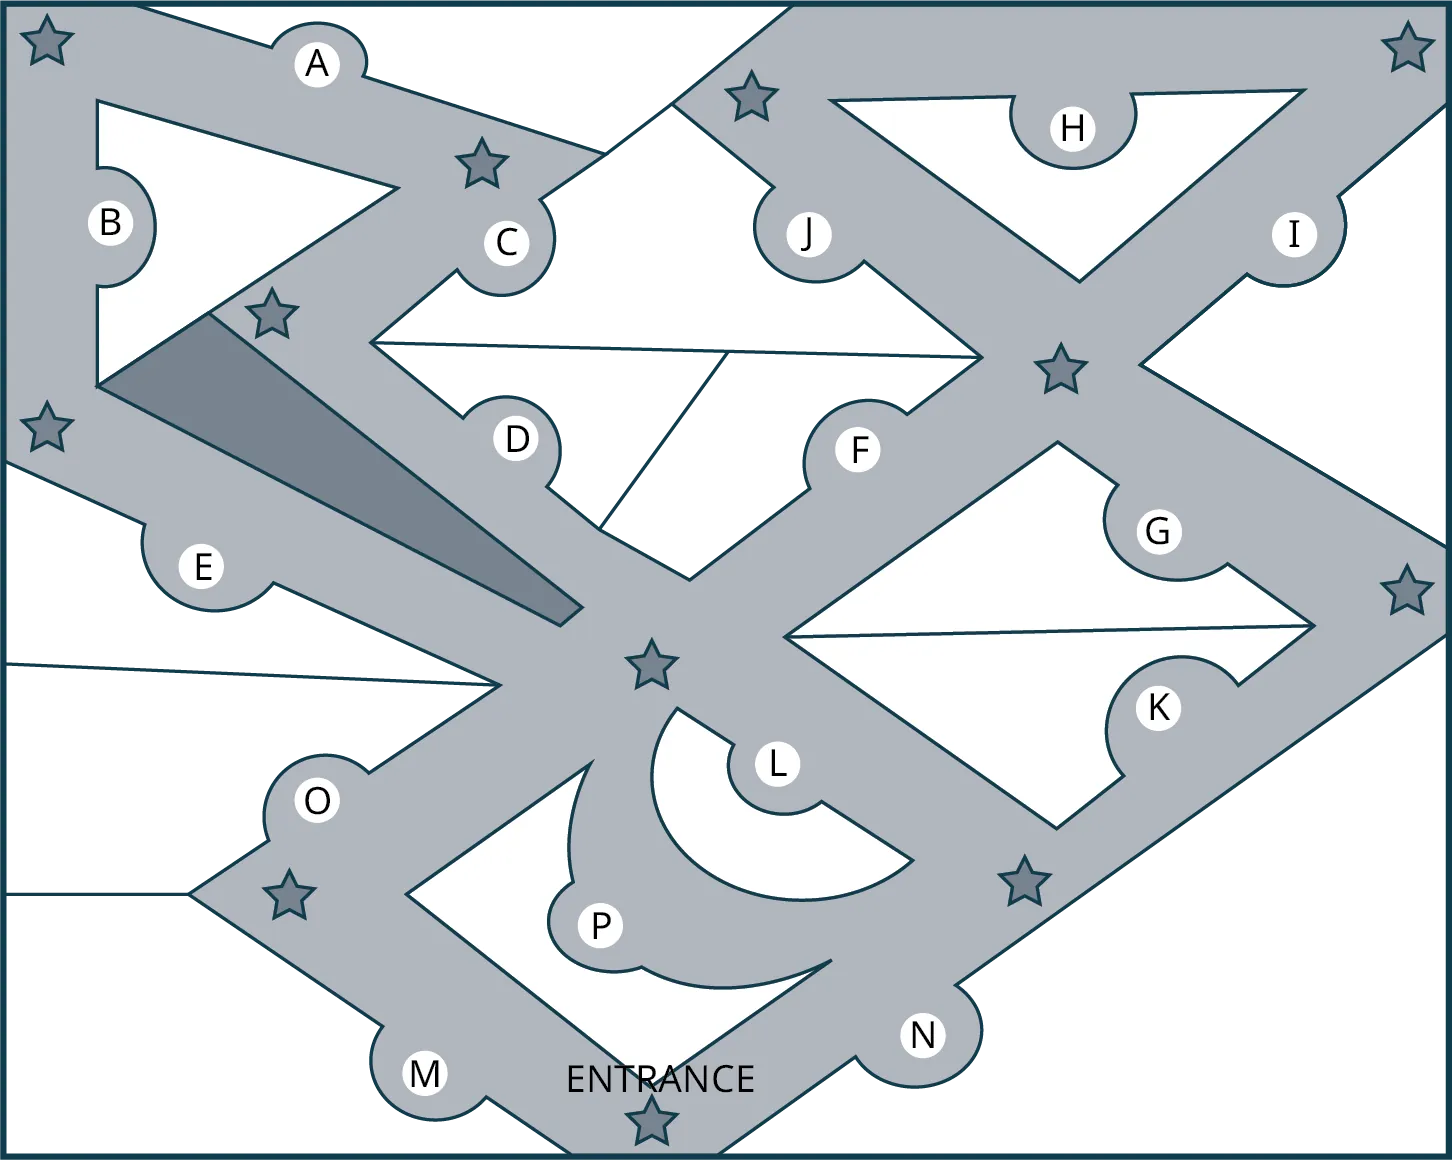 A map of zoo exhibits. The vertices are labeled A to P. The entrance is at the bottom.